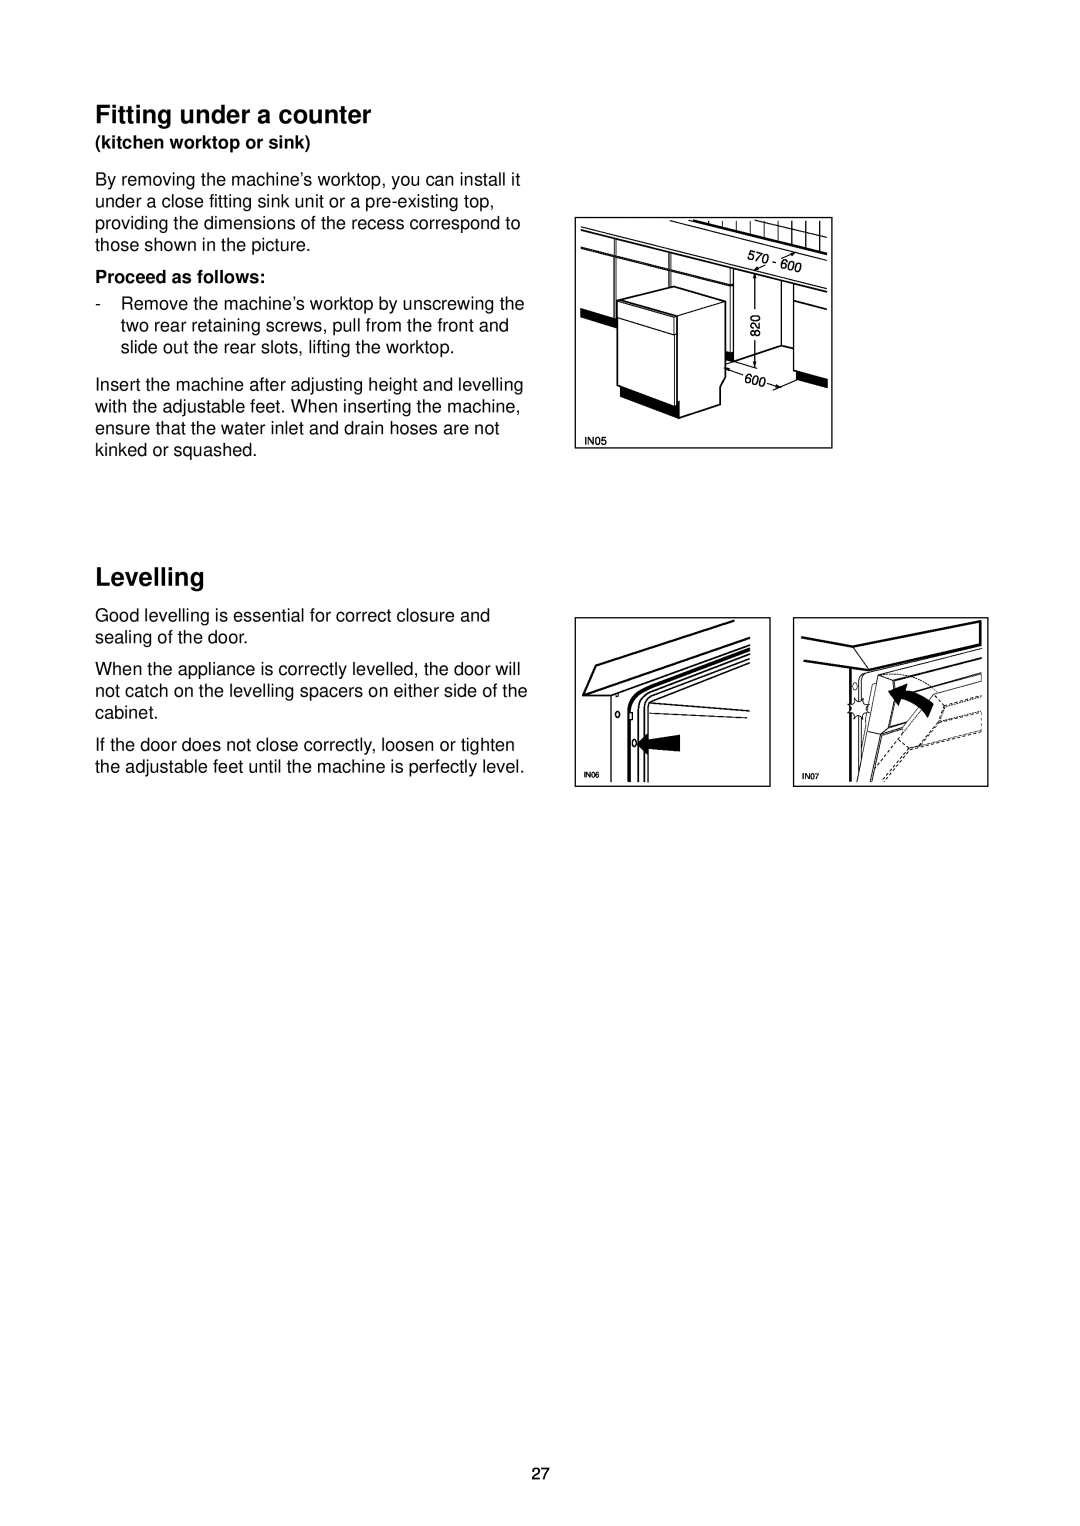 Zanussi DE 6844 A manual Fitting under a counter, Levelling, kitchen worktop or sink, Proceed as follows, IN05 